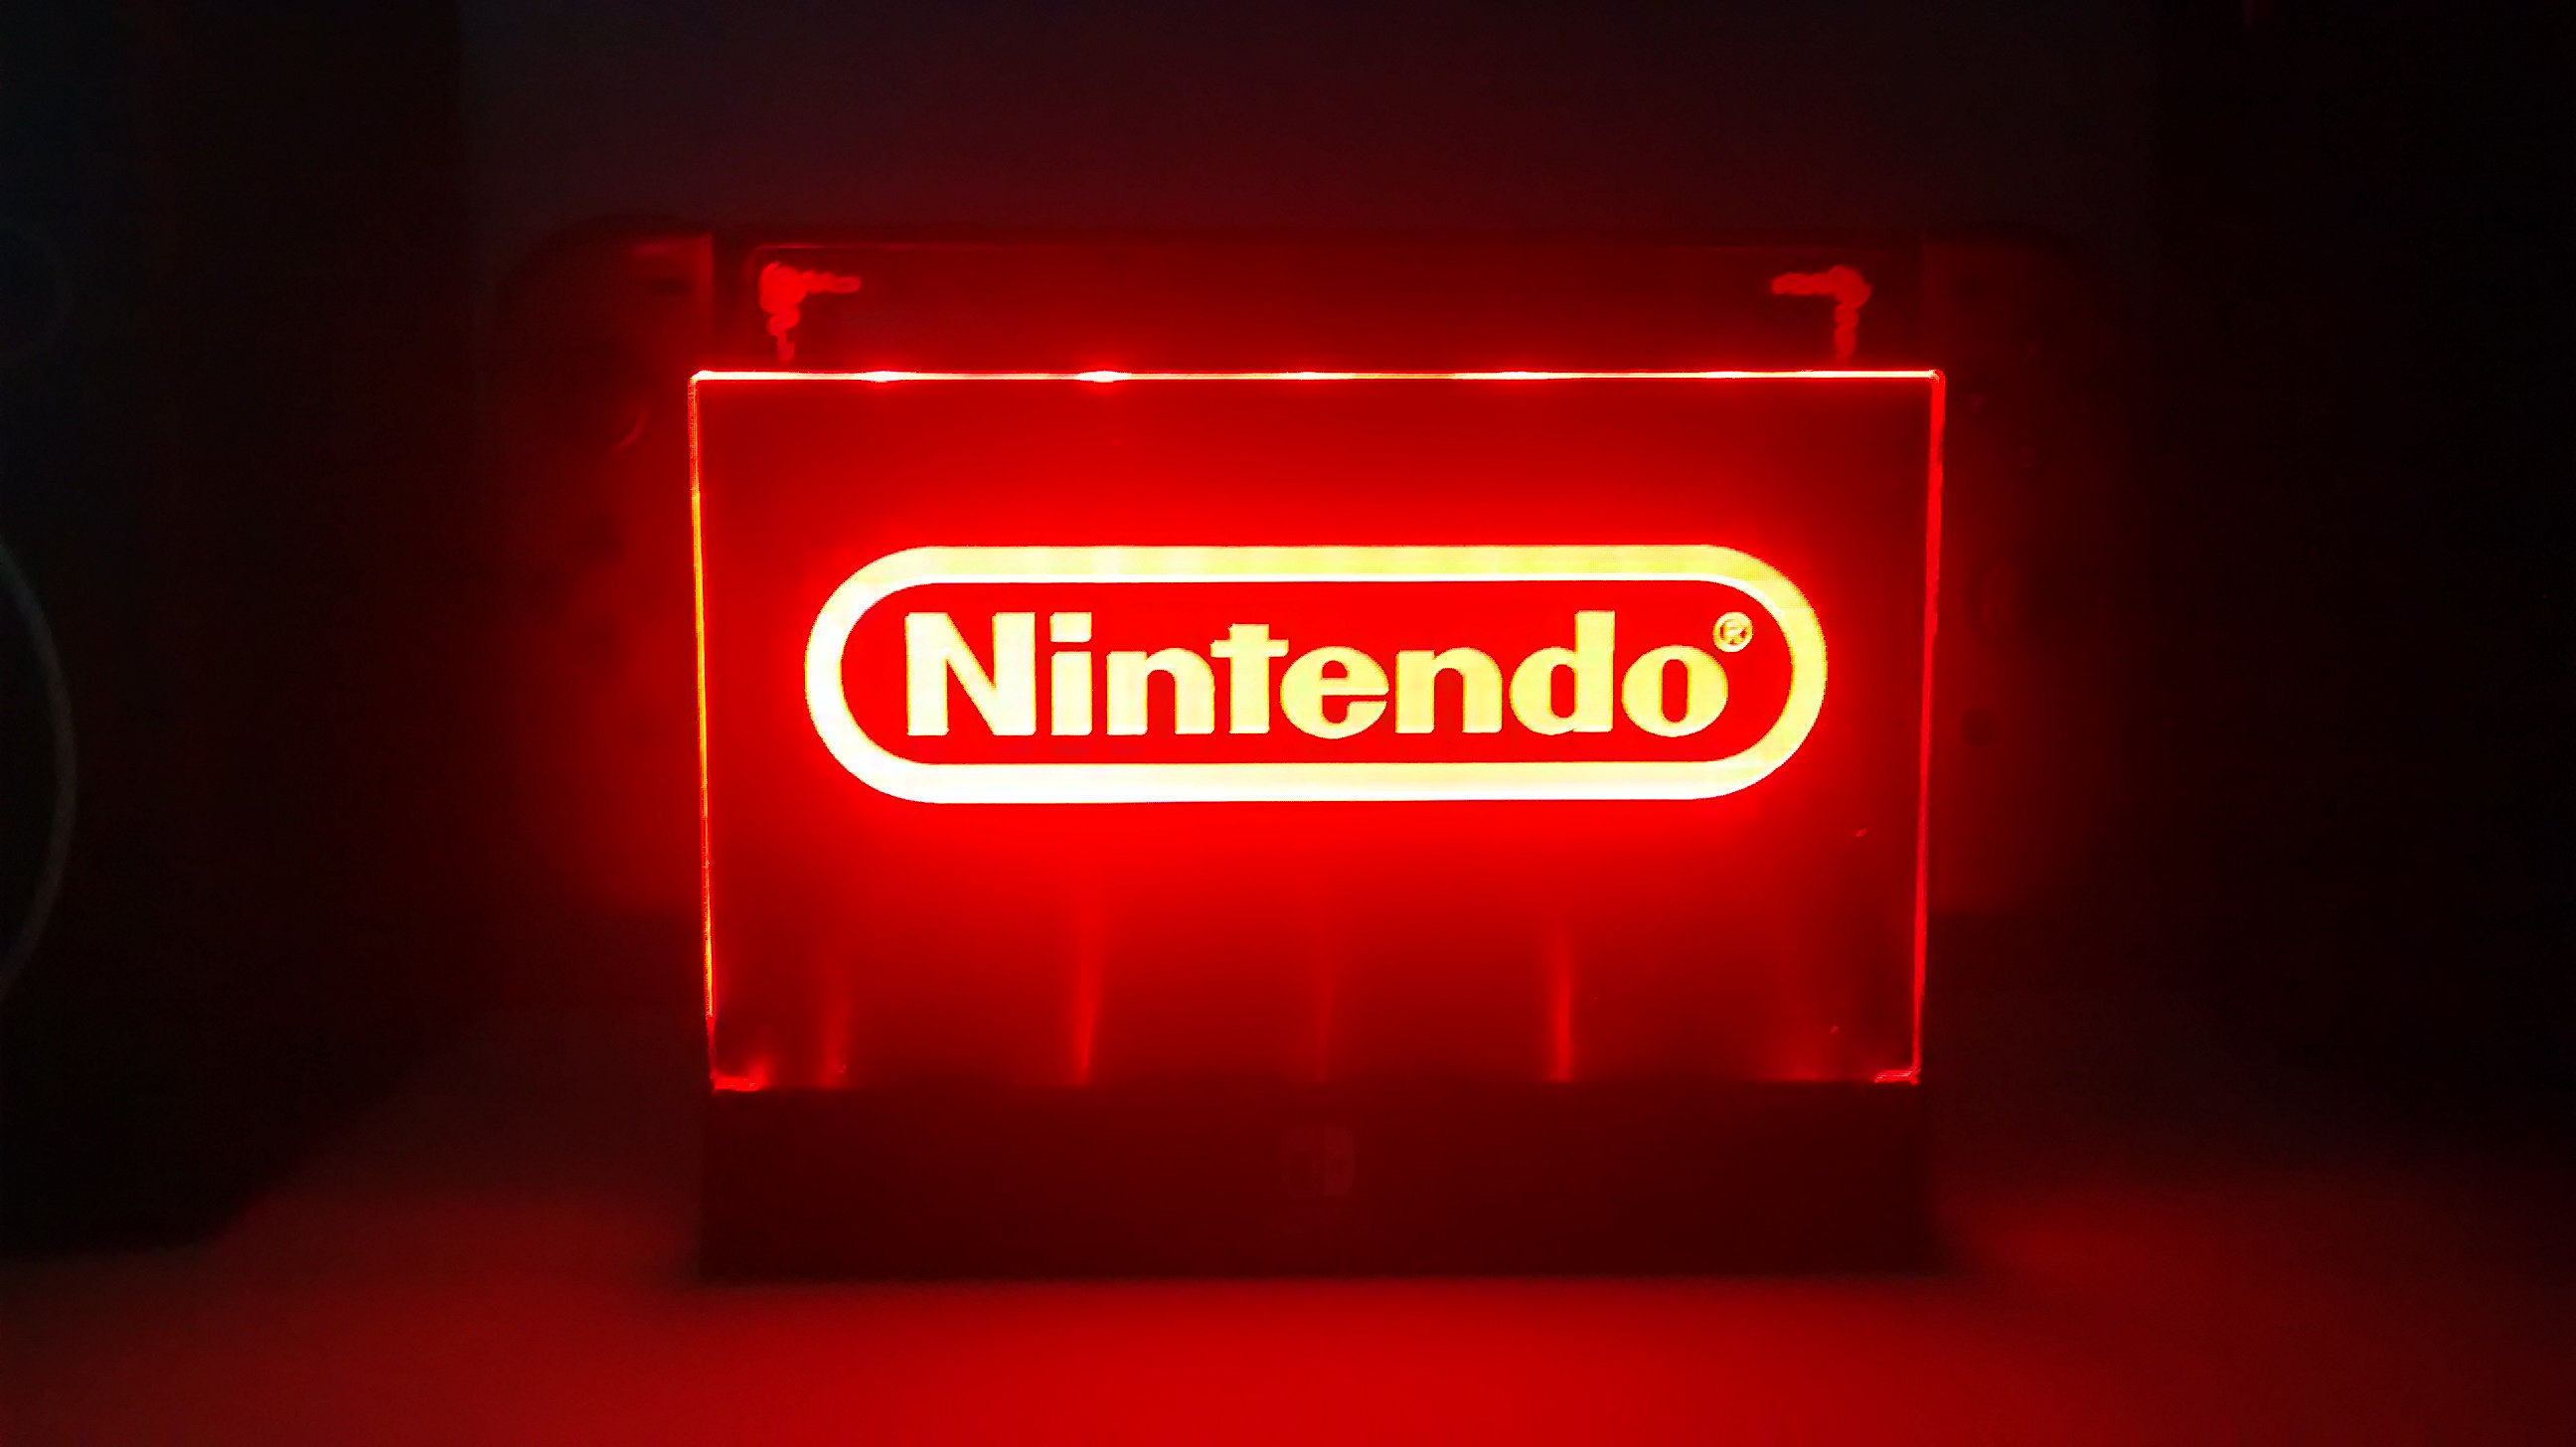 Nintendo Switch Panel /PANEL ONLY/ - Etsy